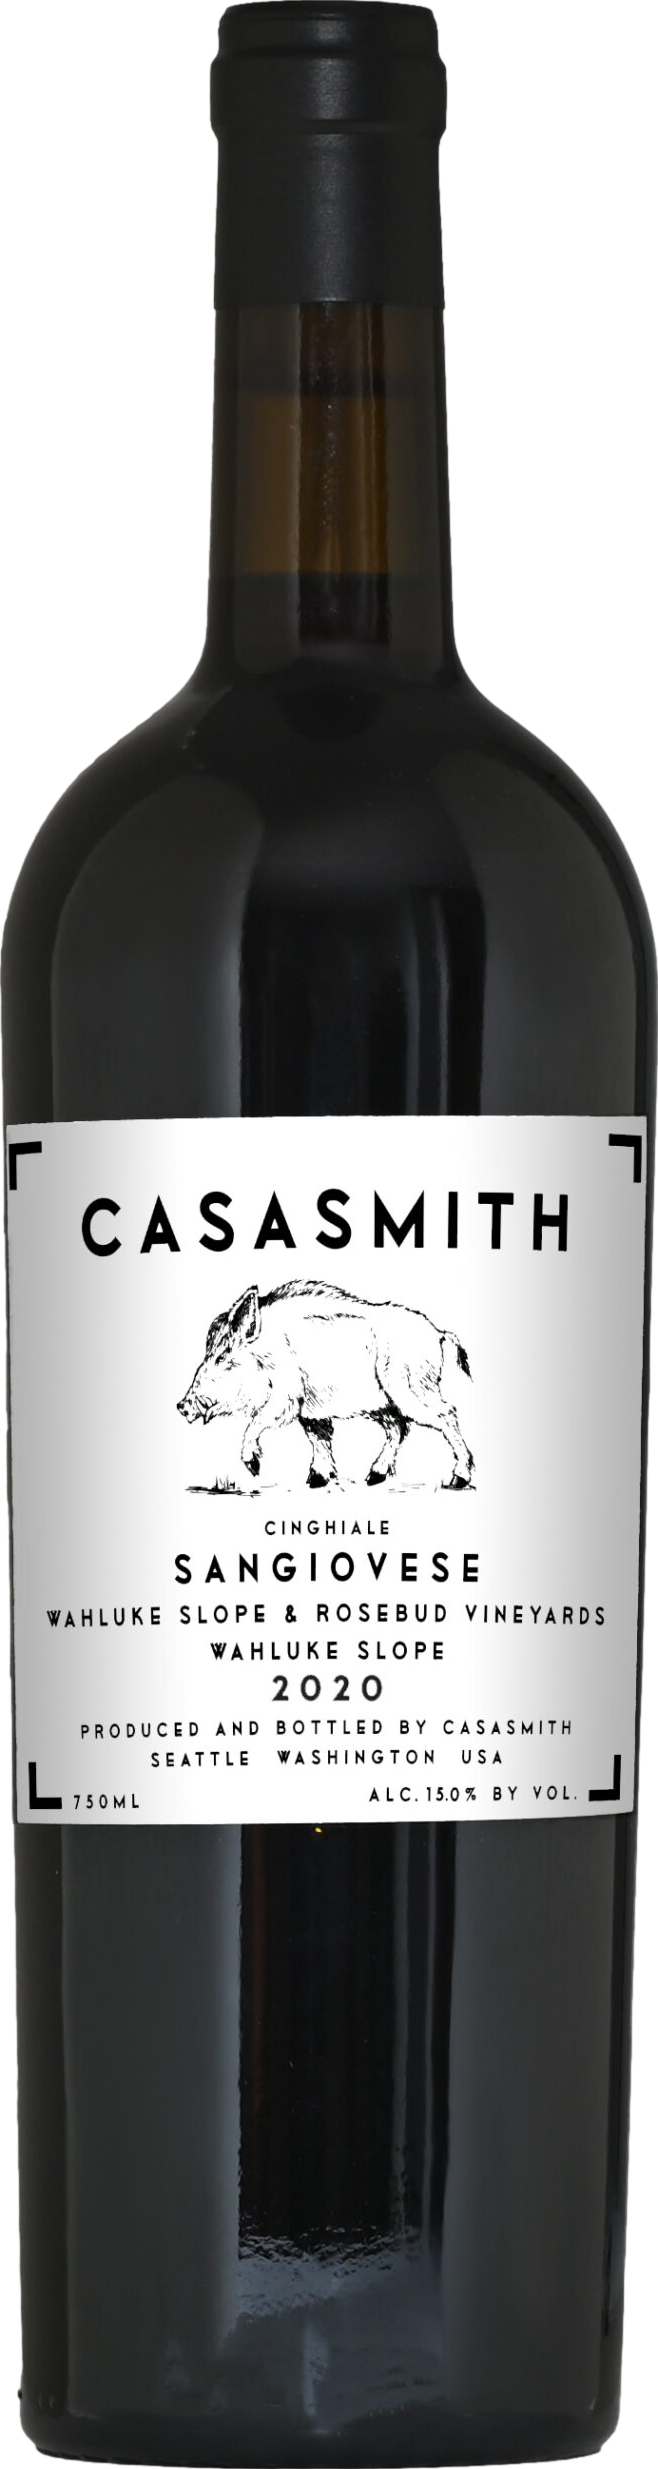 Charles Smith CasaSmith Cinghiale Sangiovese 2020 Charles Smith 8wines DACH